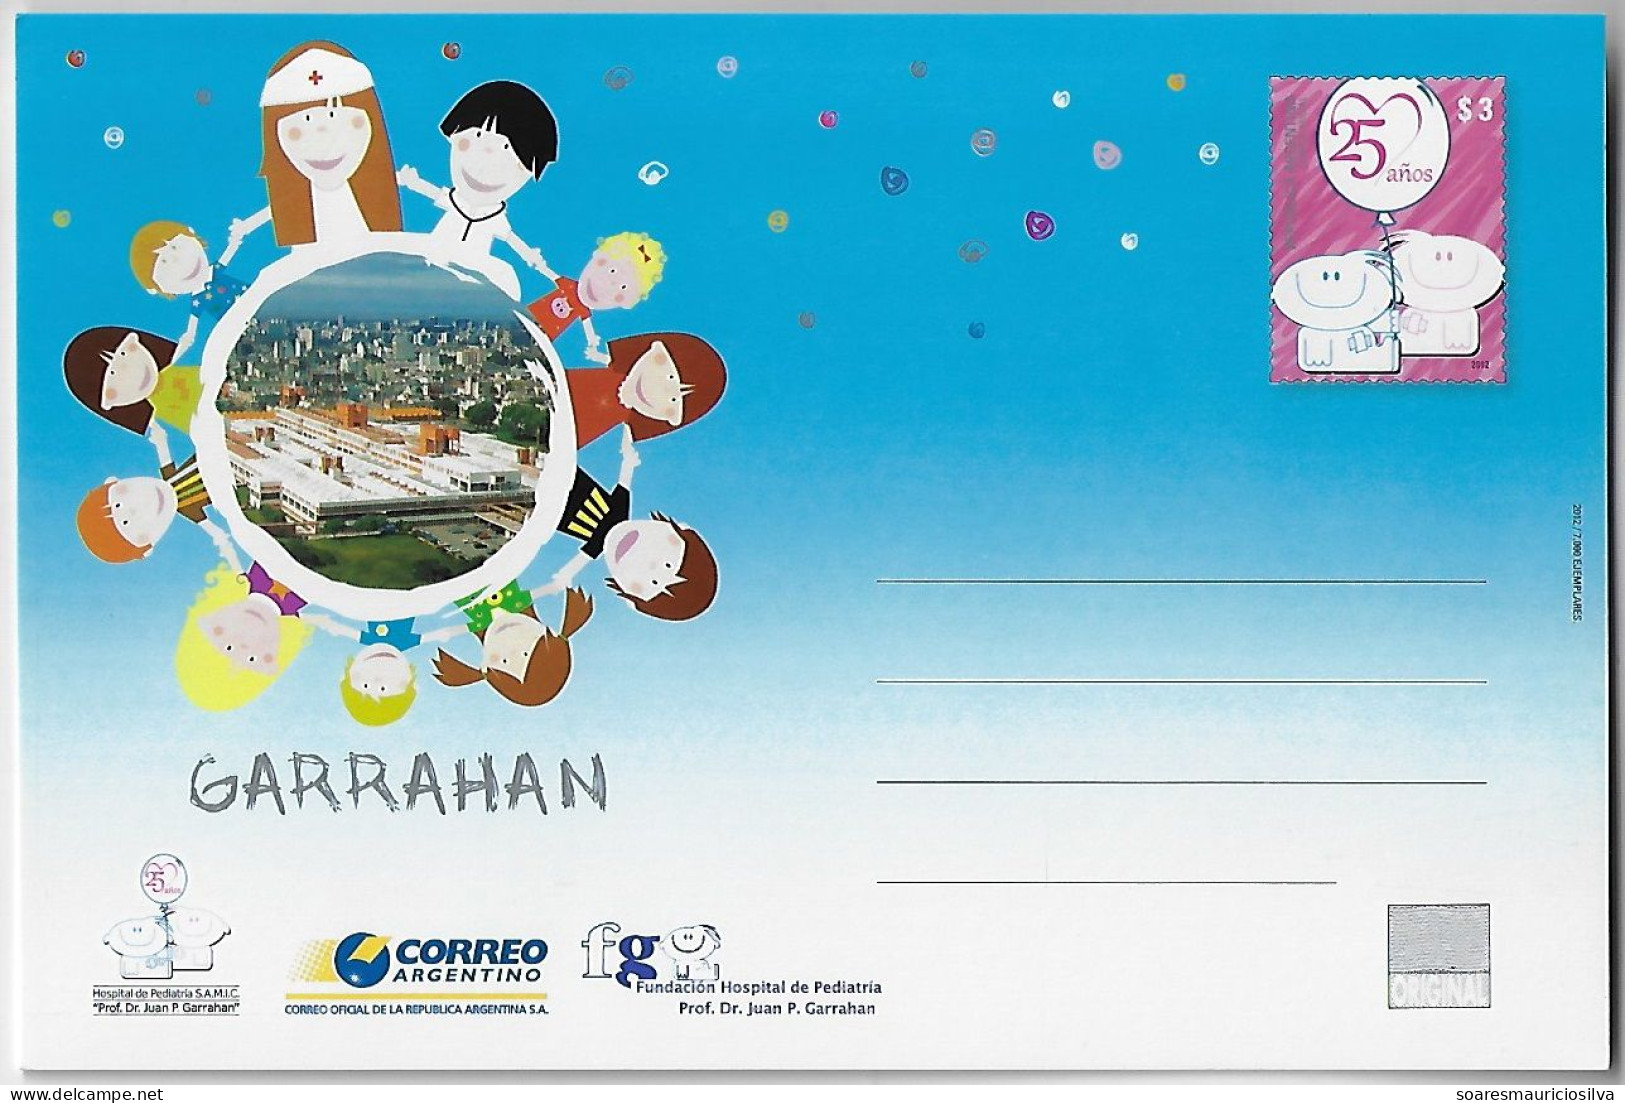 Argentina 2012 Postal Stationery Card 25 Years Hospital Of Pediatrics Garrahan In Buenos Aires Unused - Postal Stationery